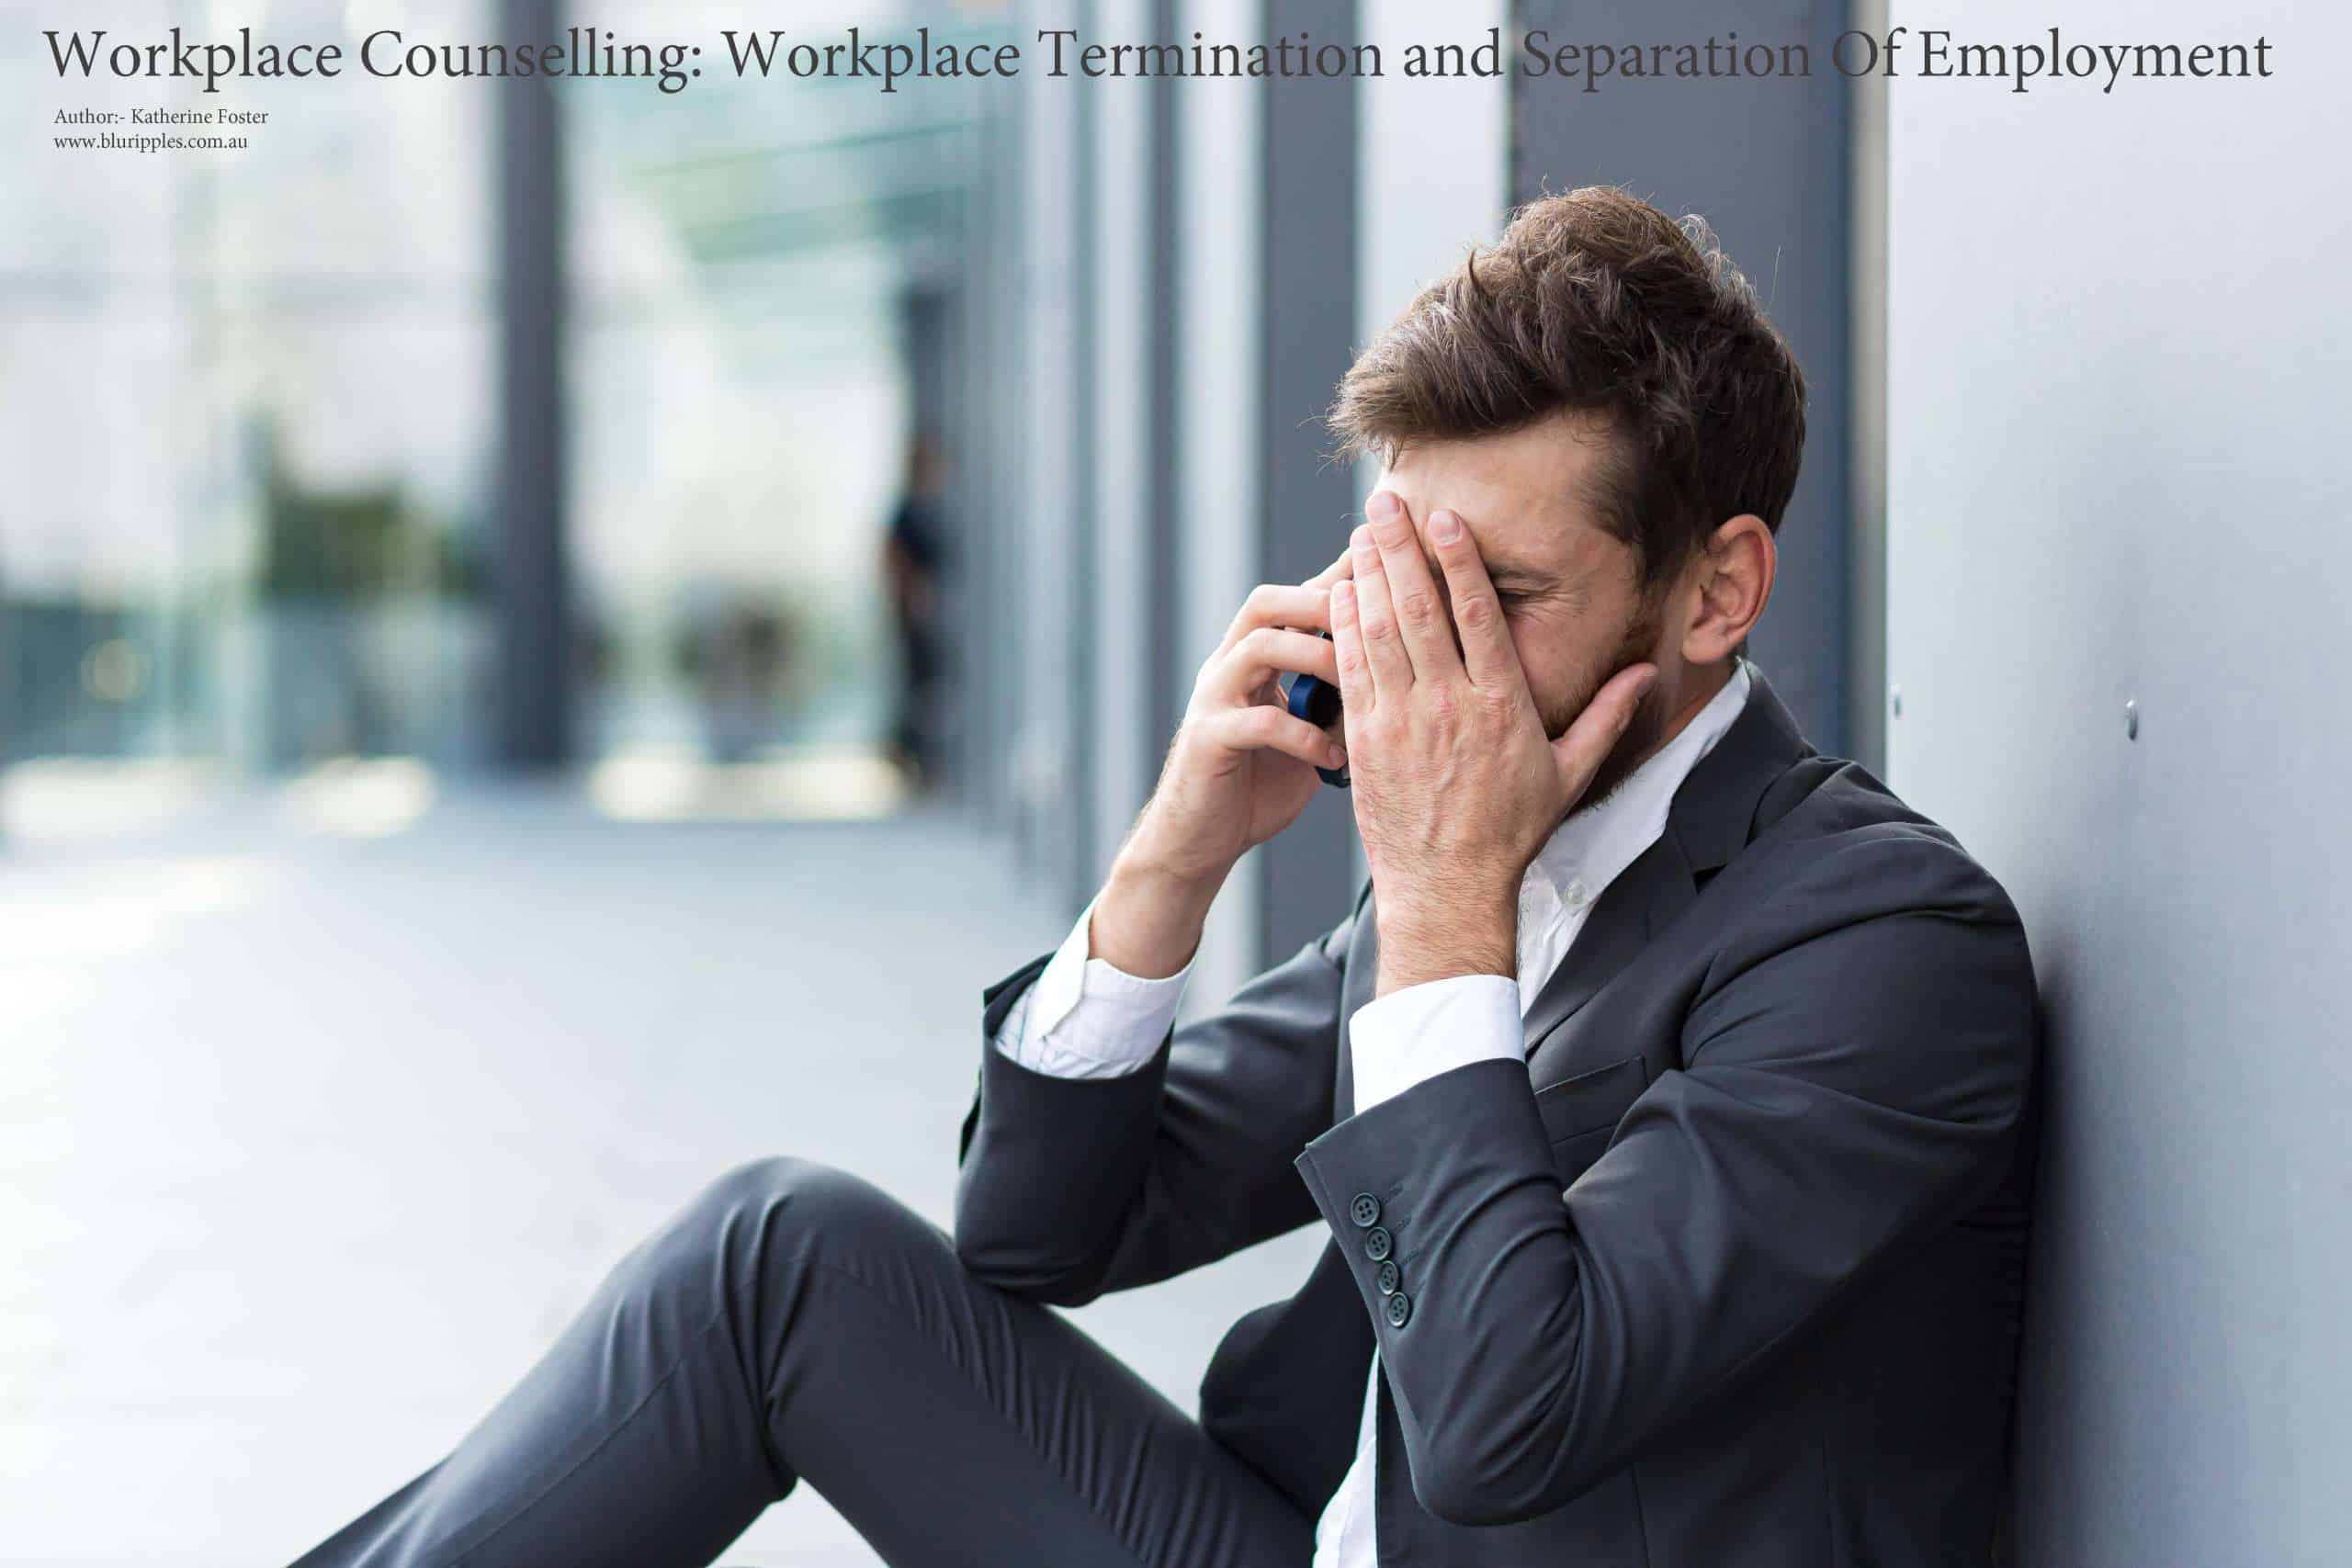 Workplace Counselling - Workplace Termination and Separation of Employment By Katherine Foster